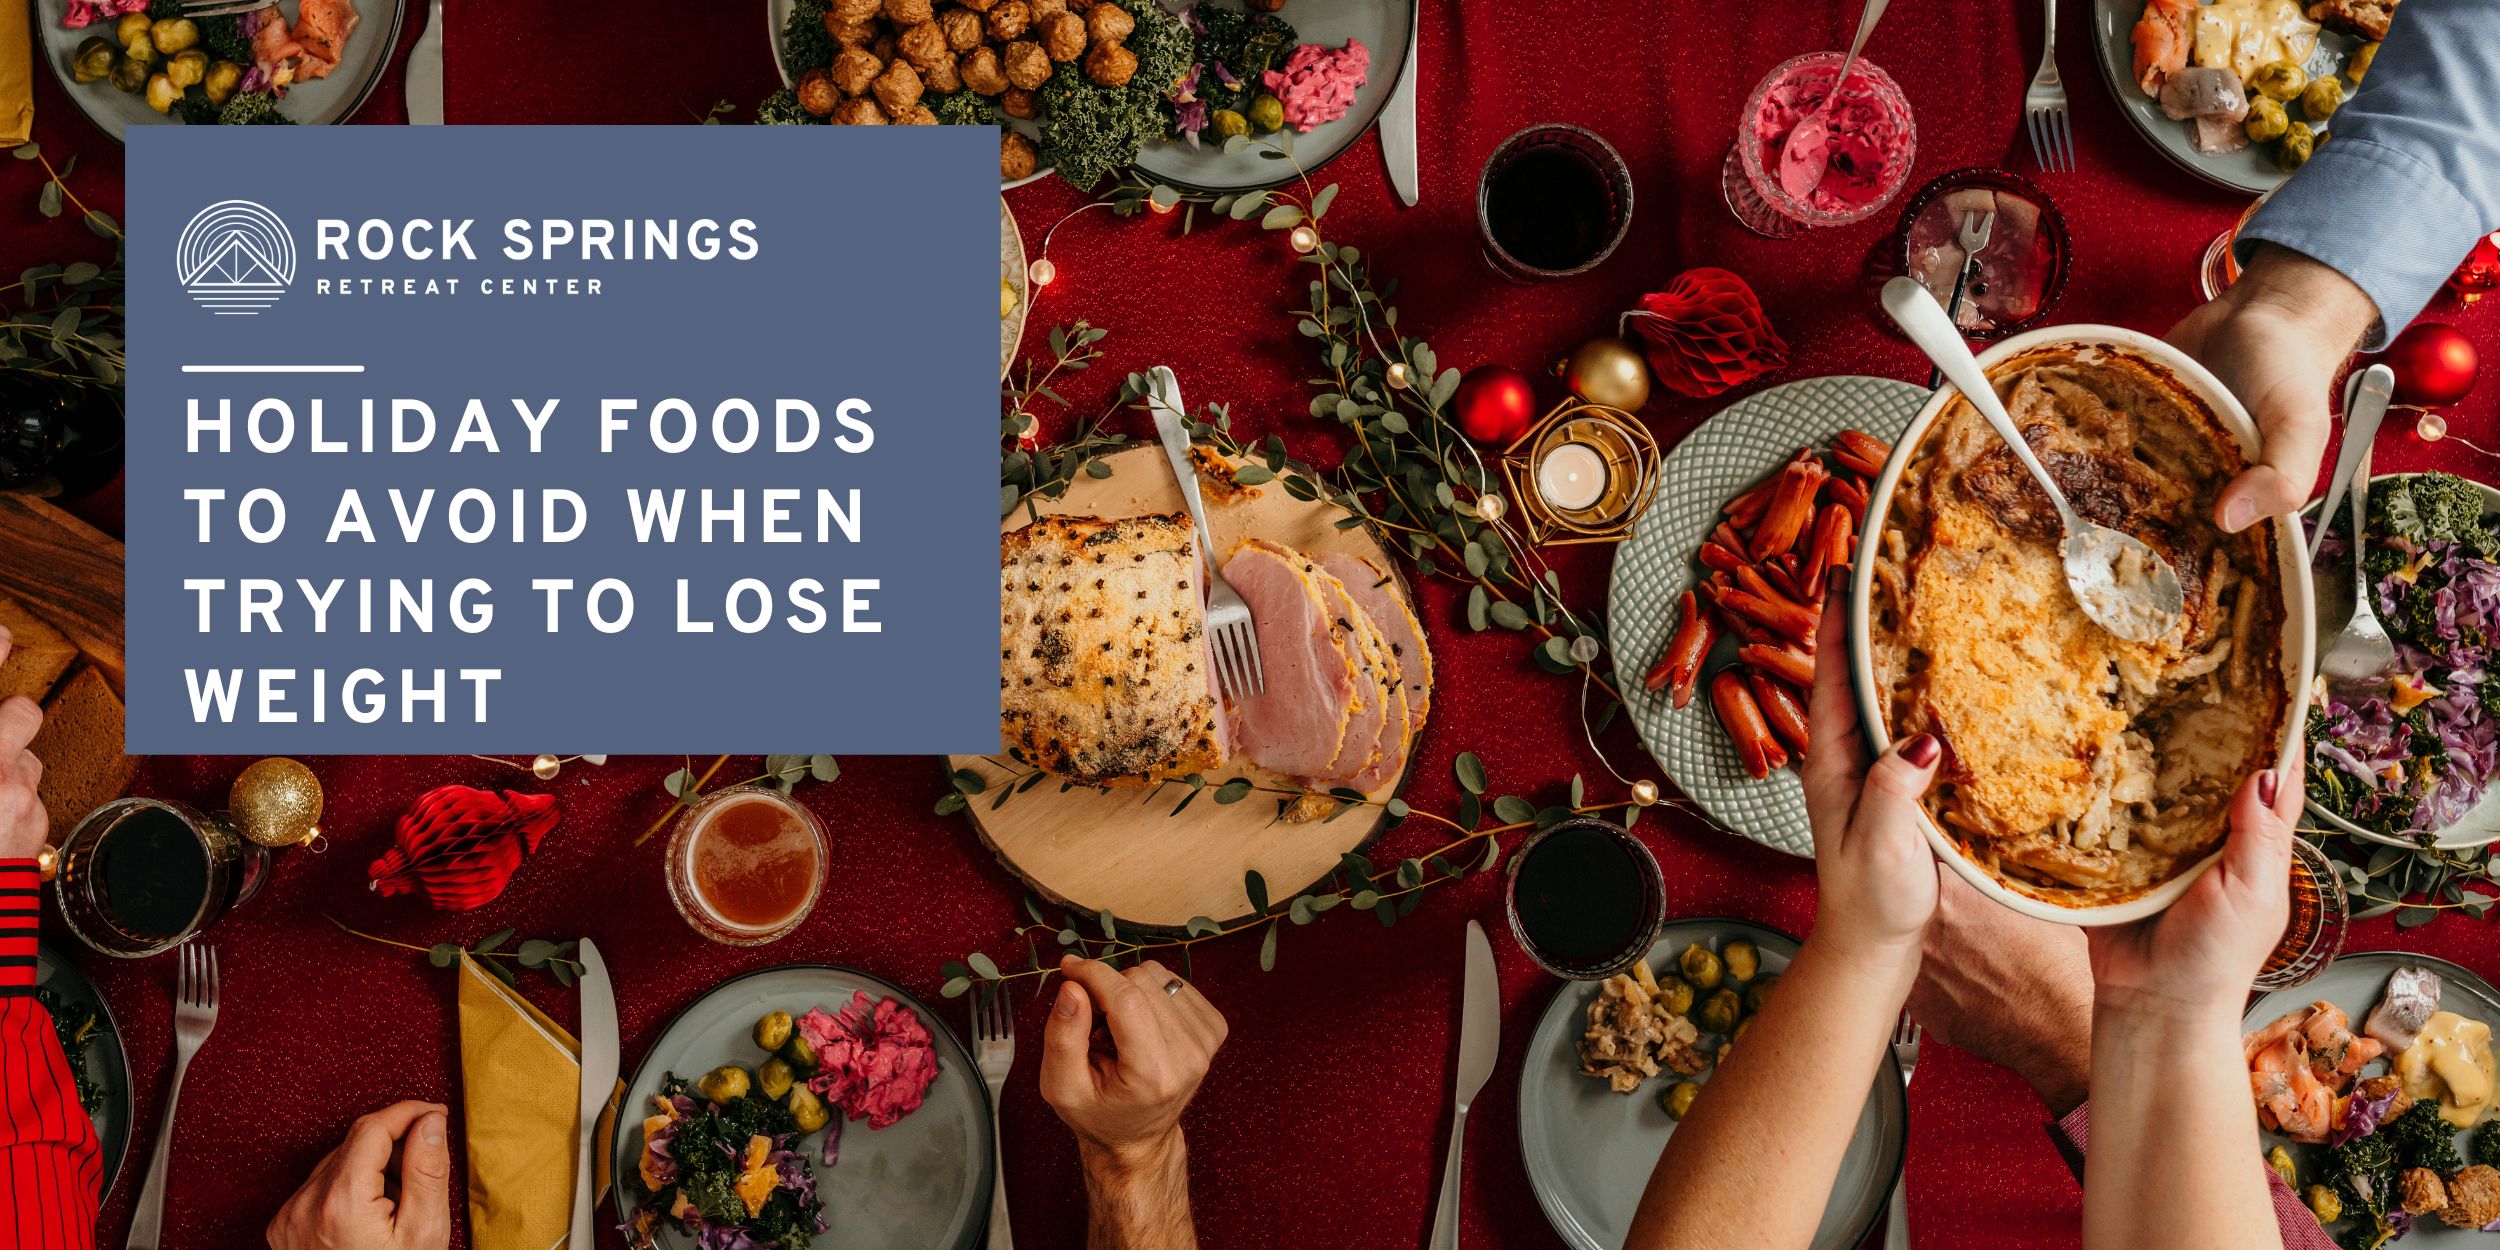 Holiday Foods to Avoid When Trying to Lose Weight